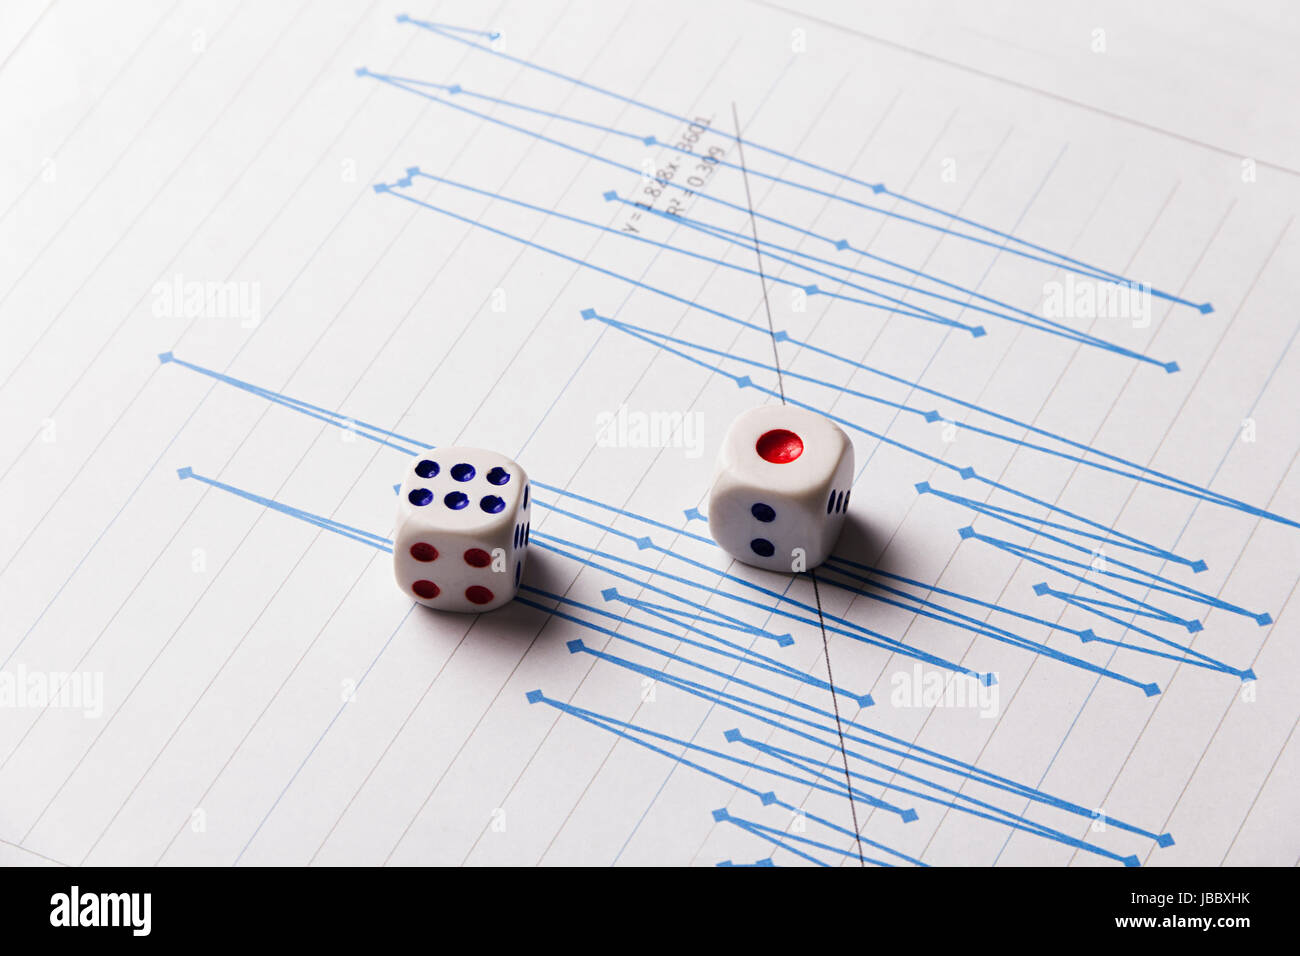 Close-Up Cube Dice With Graph Paper Stock Market Business Stock Photo